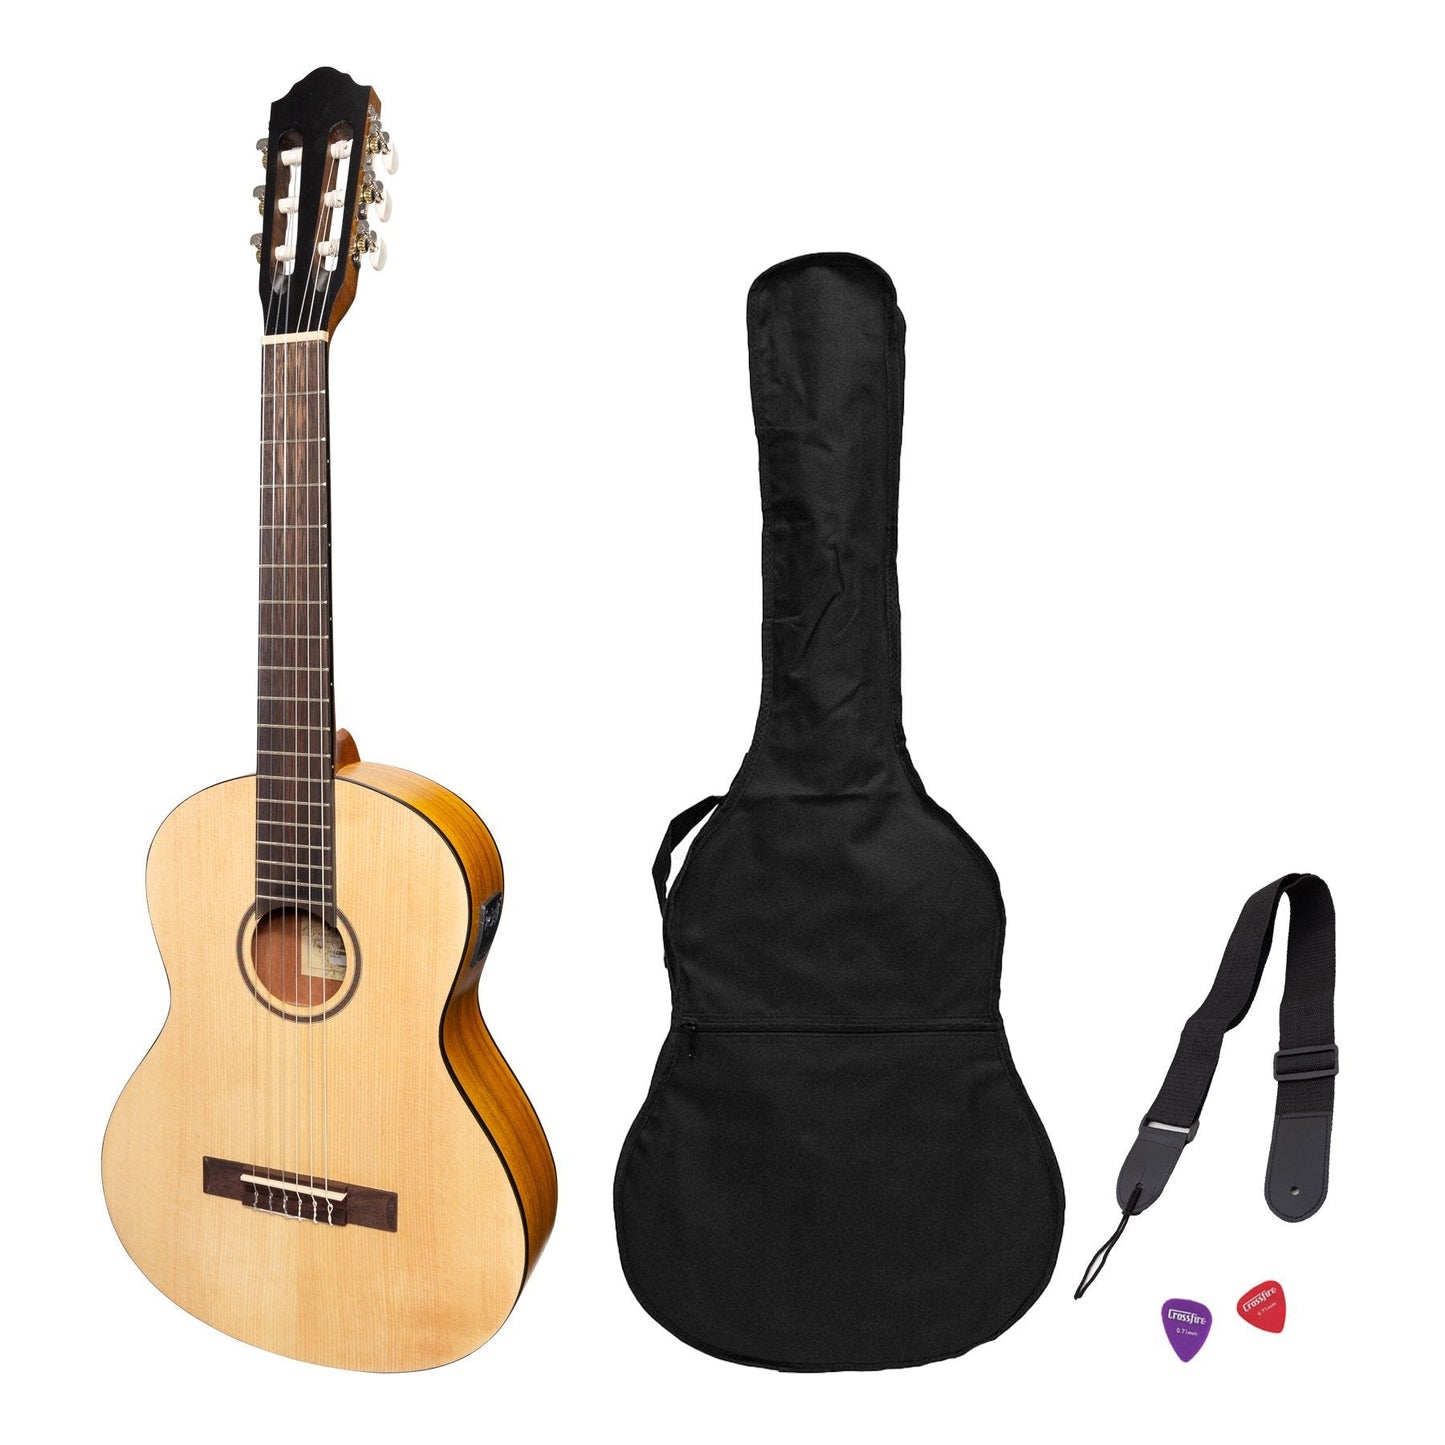 Martinez Left Handed 3/4 Size Student Classical Guitar Pack with Built In Tuner (Spruce/Koa)